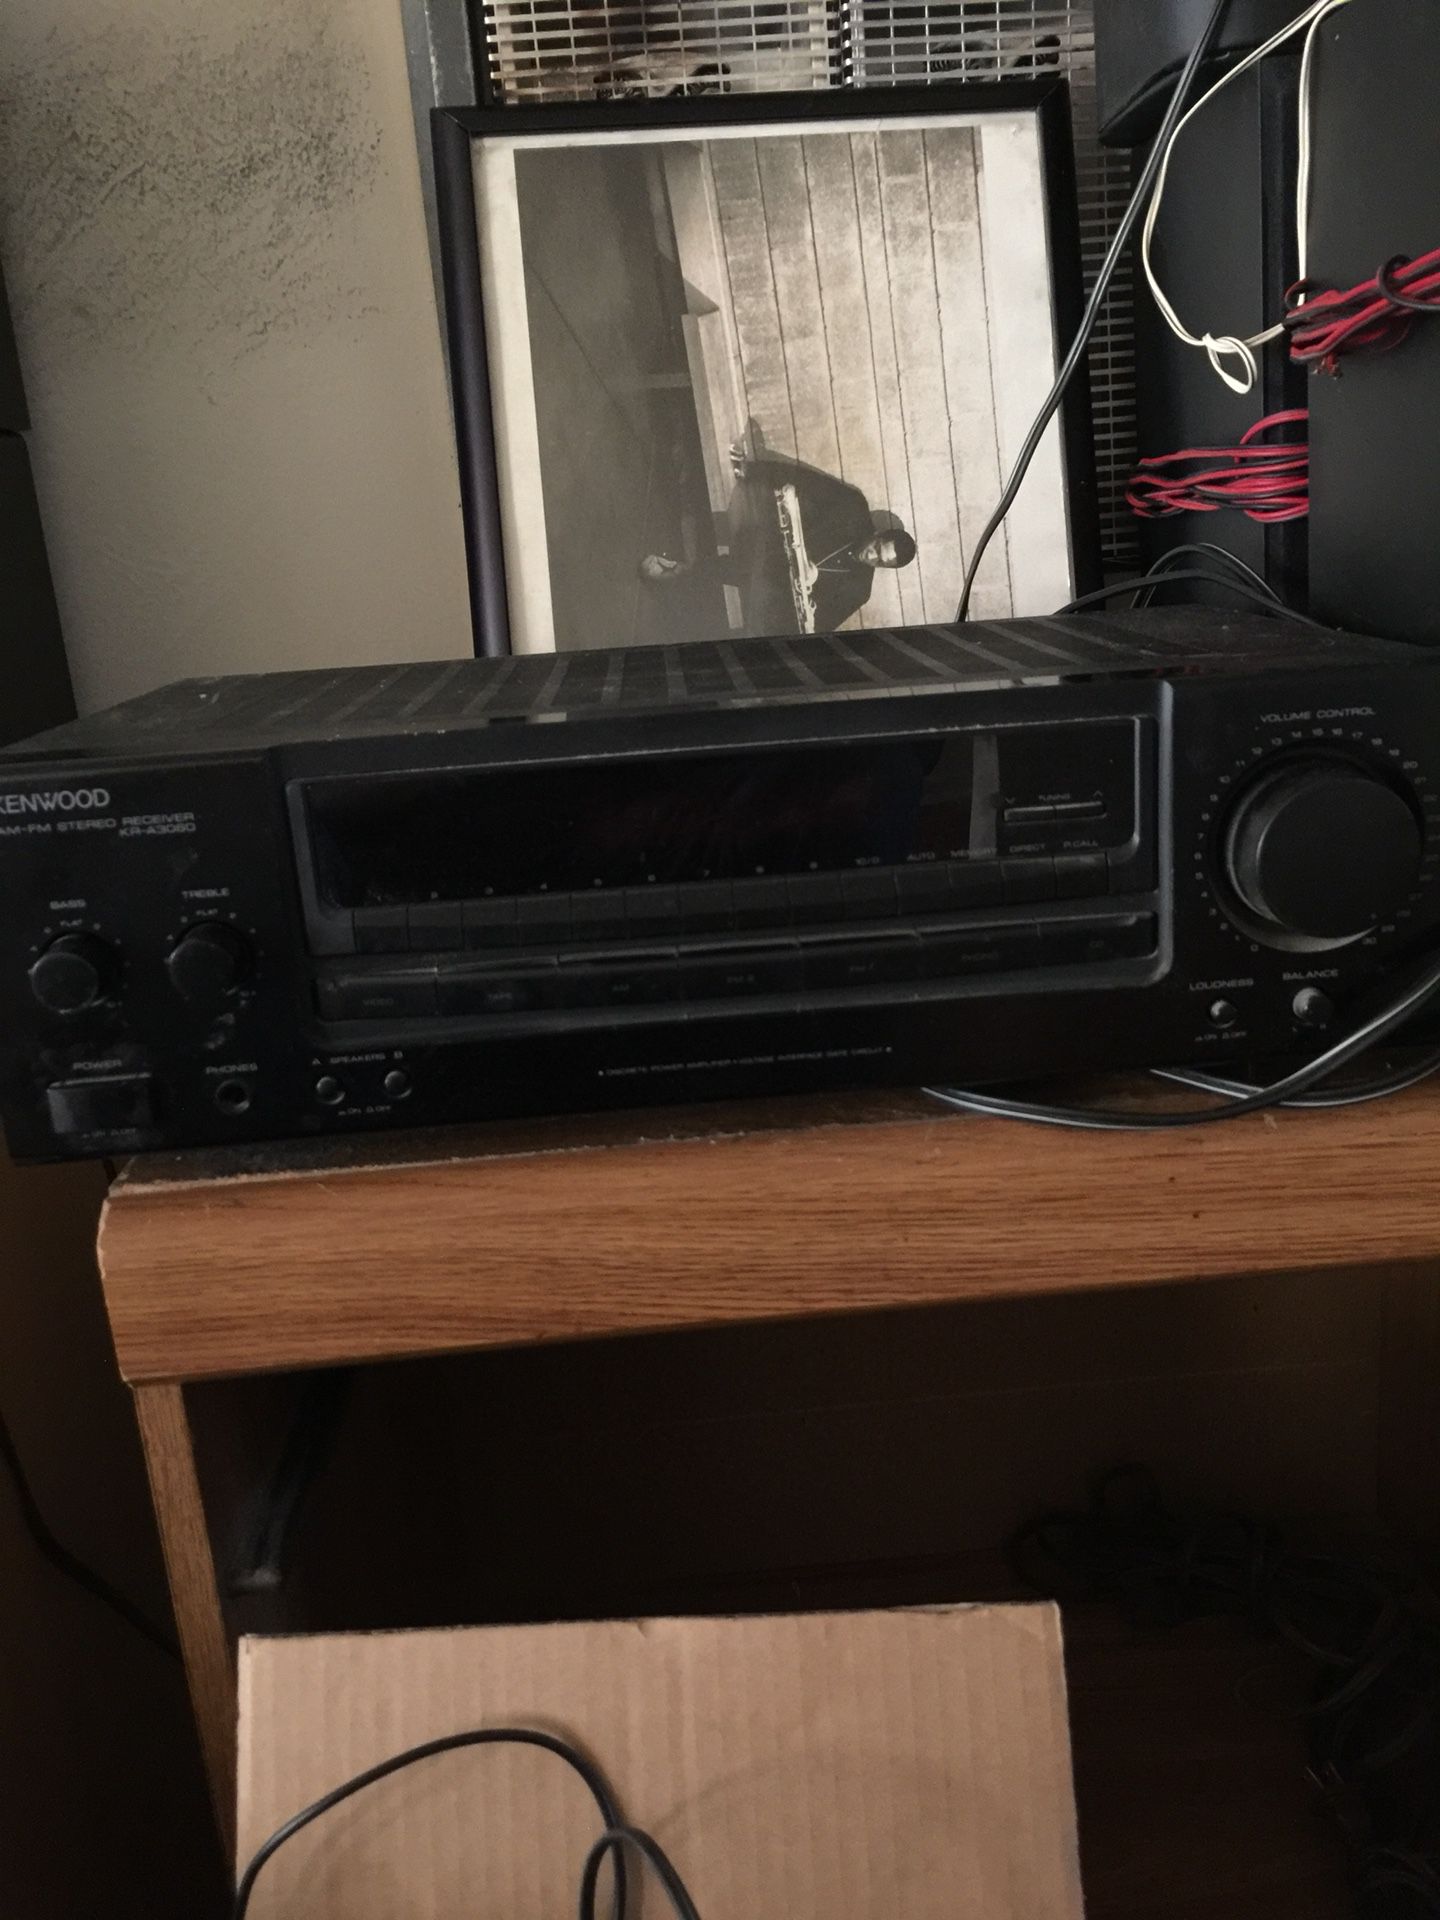 Kenwood stereo receiver